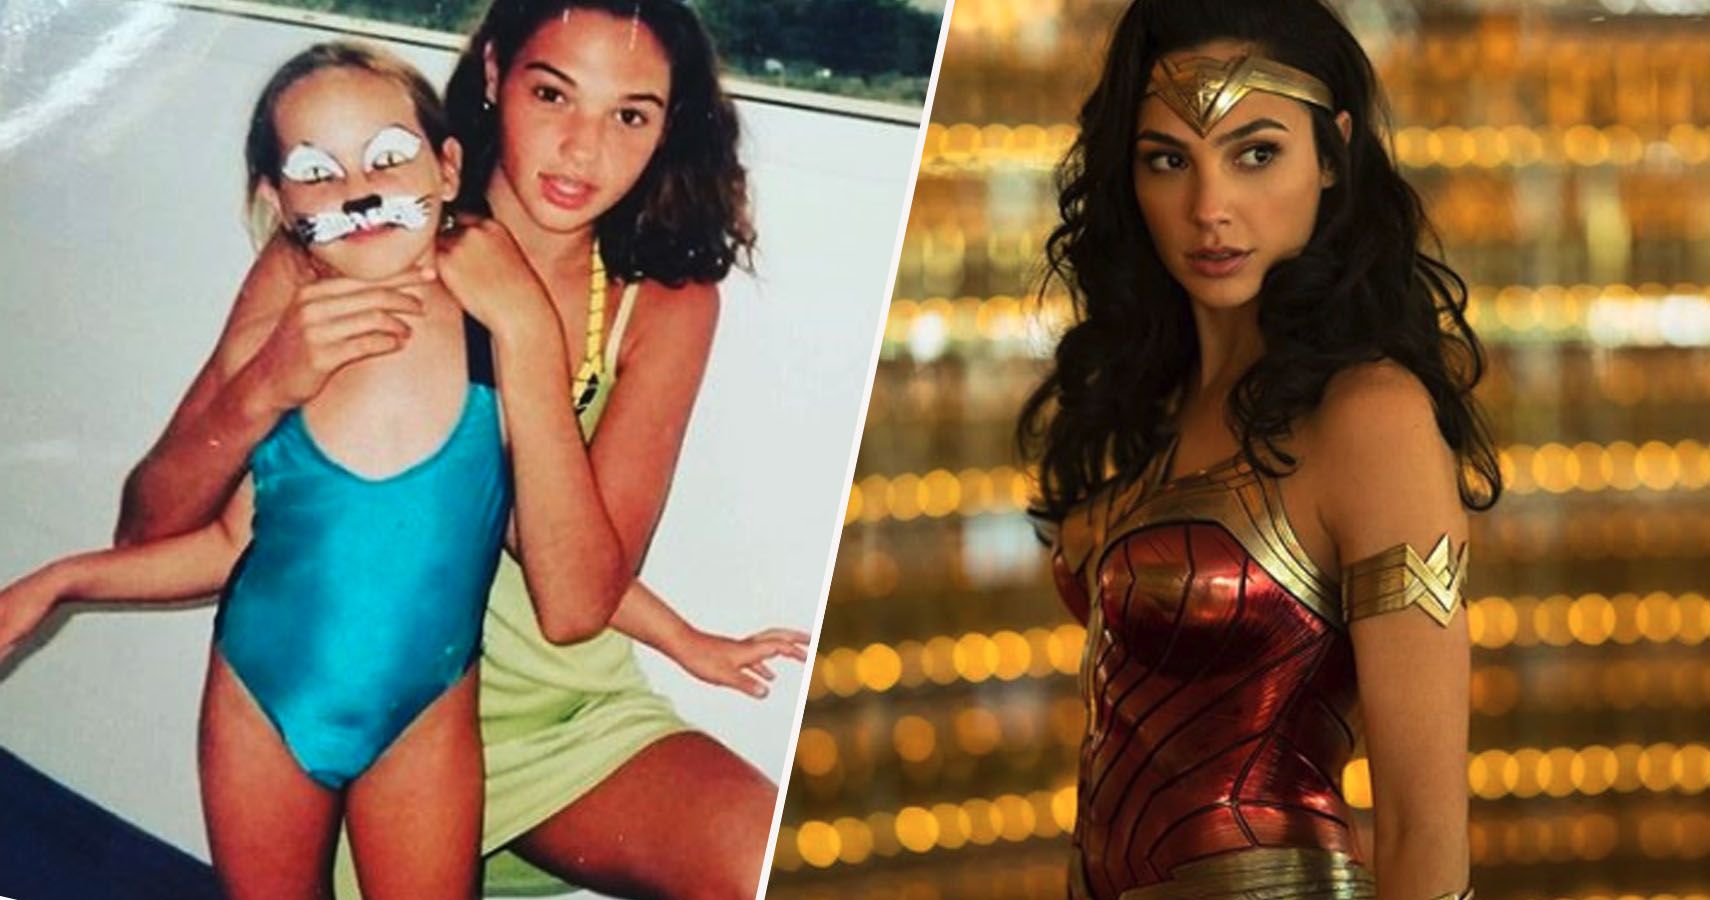 gal gadot before and after becoming wonder woman